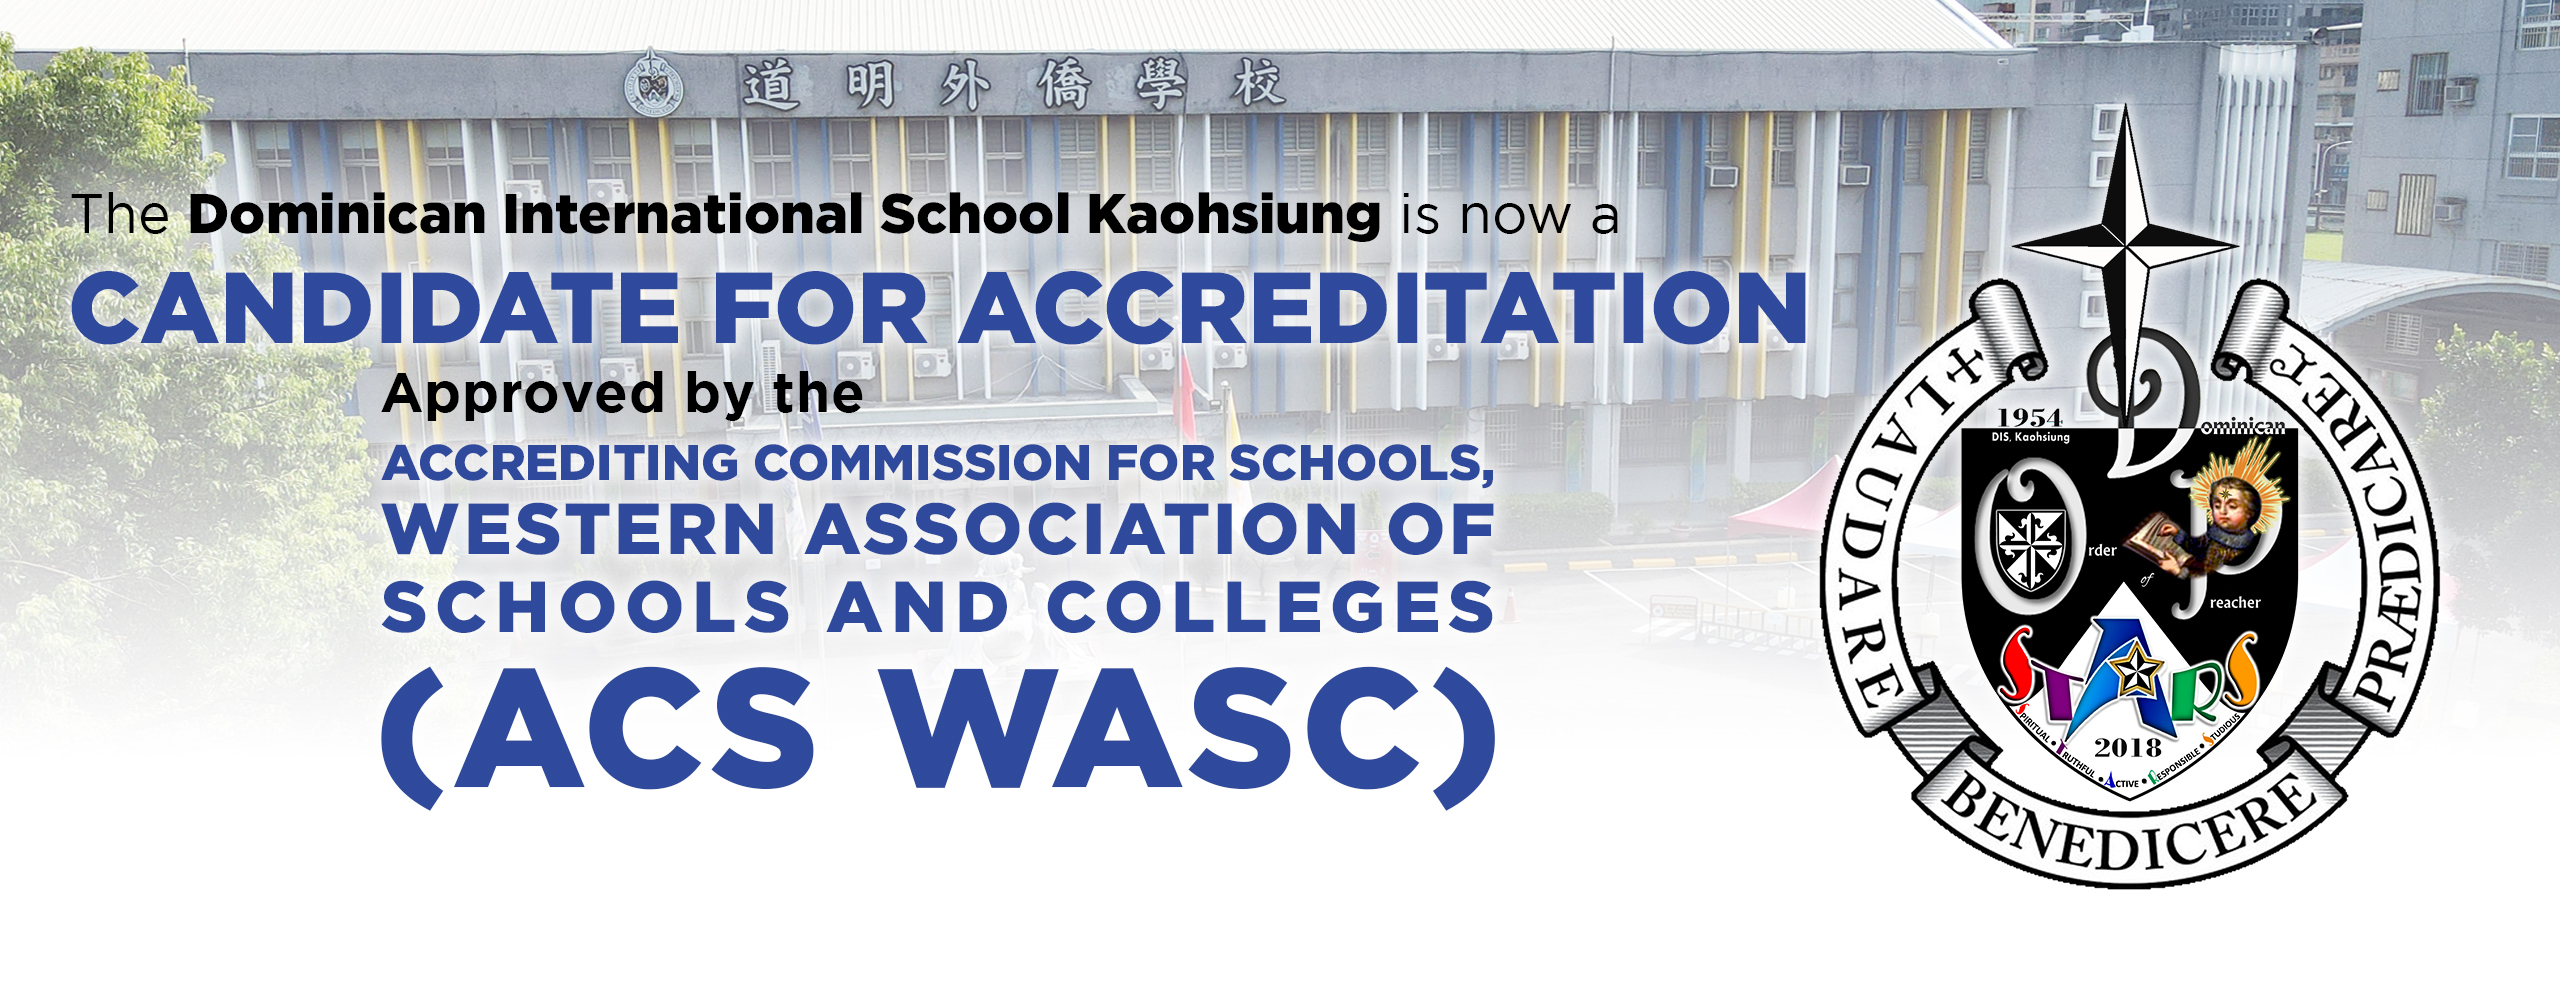 DISK accepted for WASC Candidacy